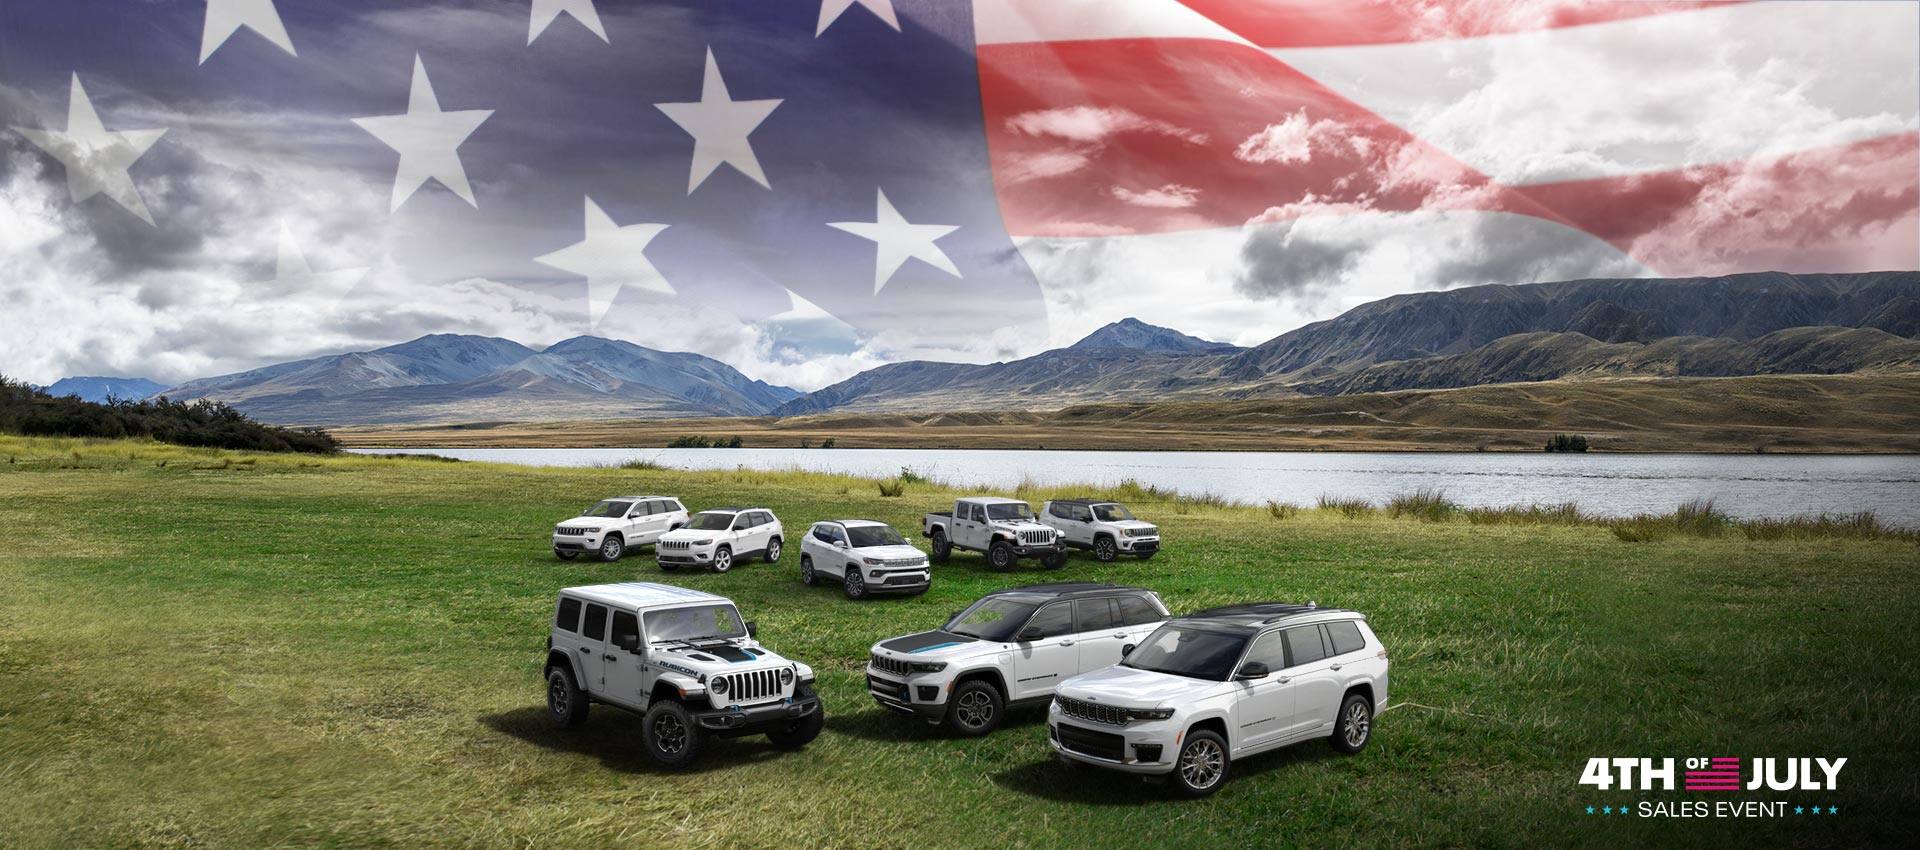 The 2022 Jeep Brand lineup parked beside a lake with mountains and an overlay of the American flag in the background. Front row: the Wrangler Unlimited Rubicon 4xe, Grand Cherokee 4xe Trailhawk and Grand Cherokee L. Back row: Grand Cherokee WK Limited, Cherokee Limited, Compass Limited, Gladiator Rubicon and Renegade Limited. The 4th of July Sales Event Logo.